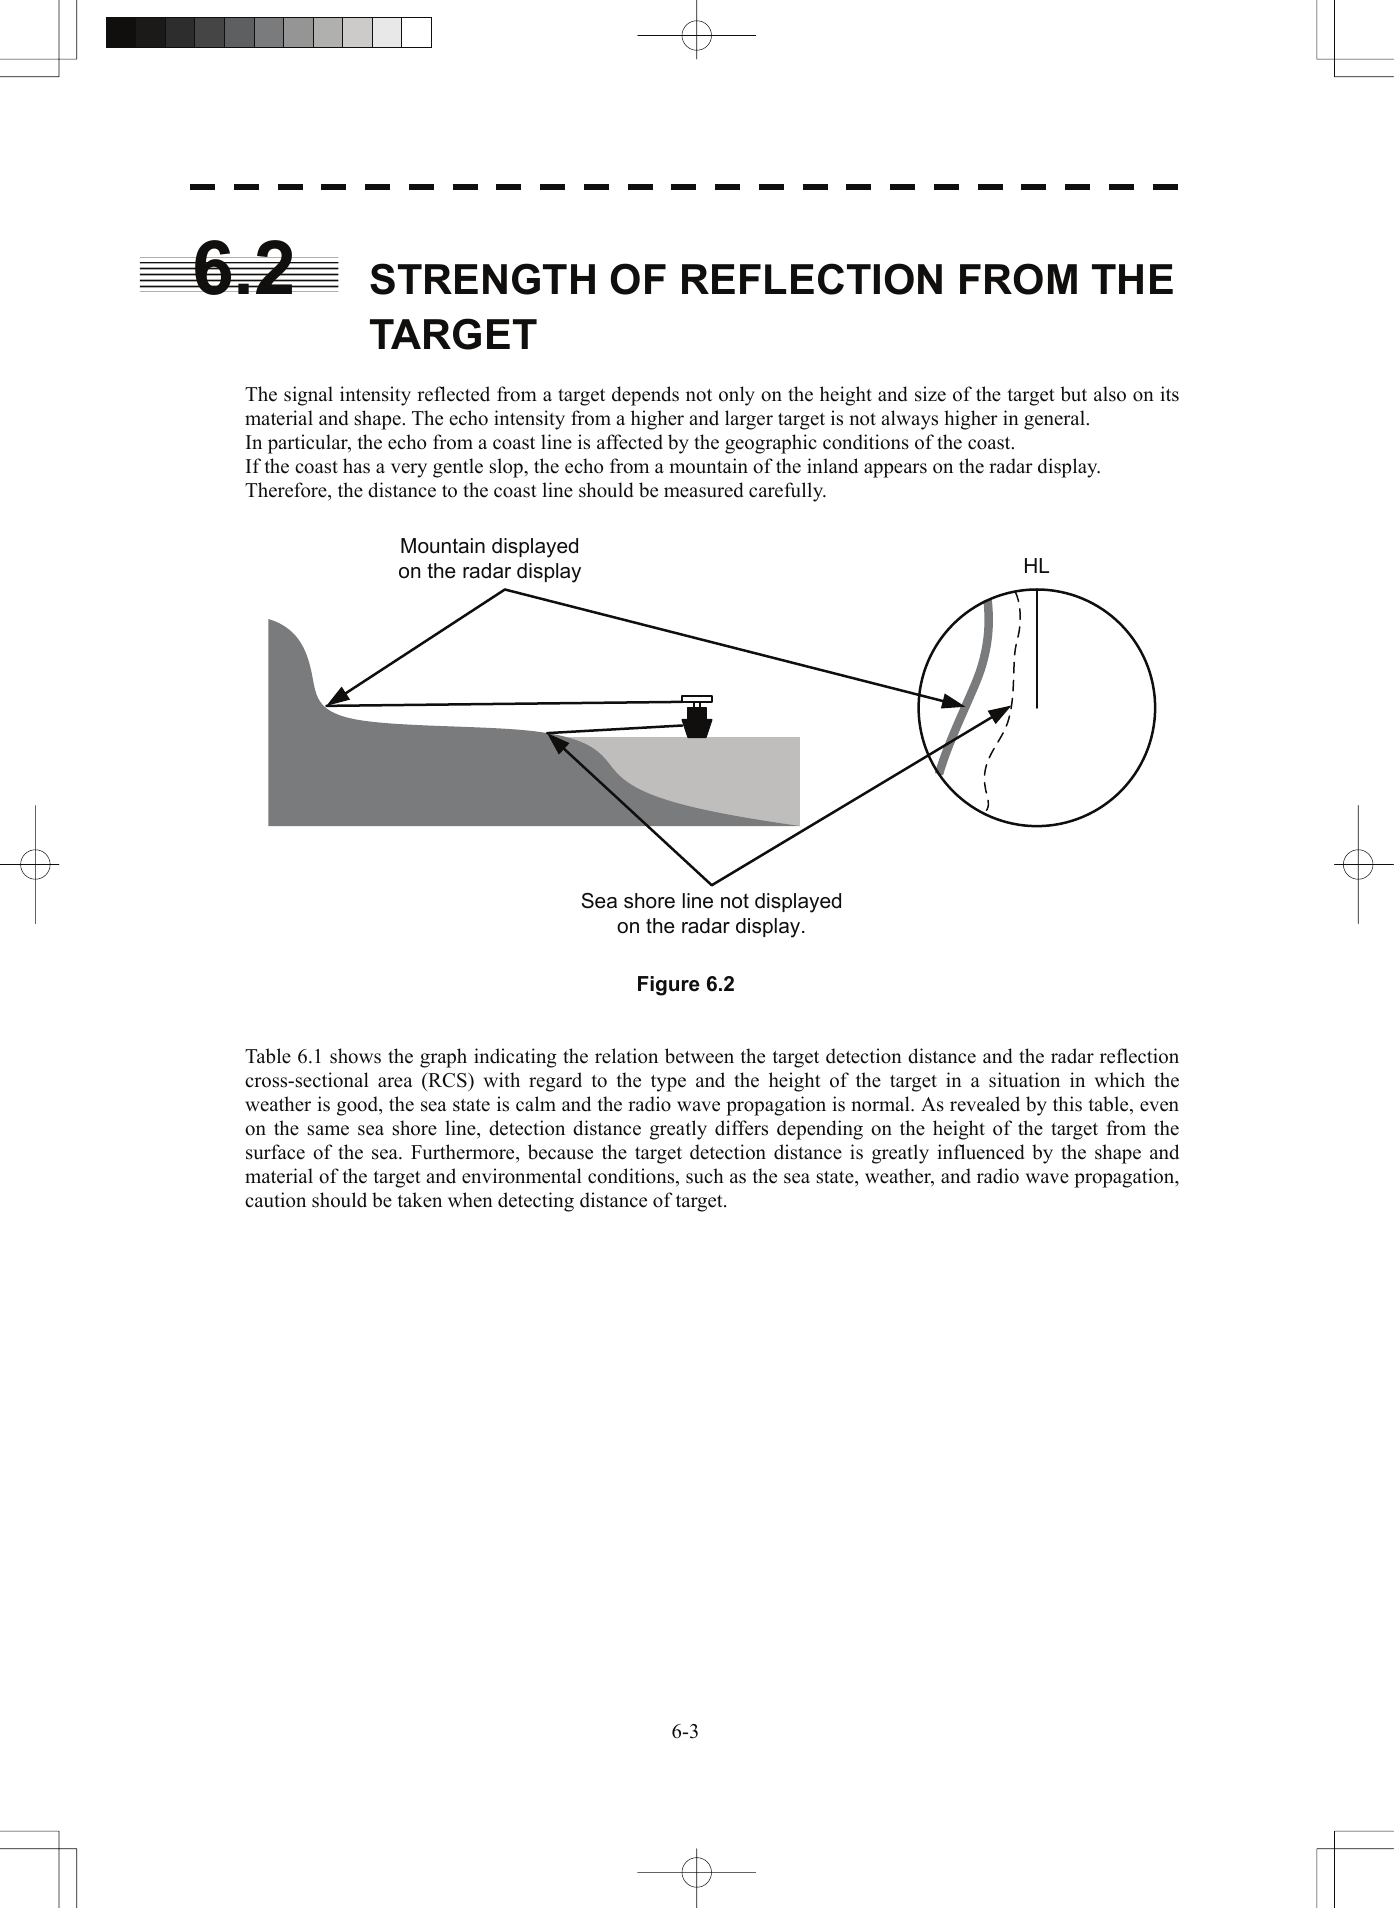  6.2  STRENGTH OF REFLECTION FROM THE TARGET  The signal intensity reflected from a target depends not only on the height and size of the target but also on its material and shape. The echo intensity from a higher and larger target is not always higher in general. In particular, the echo from a coast line is affected by the geographic conditions of the coast. If the coast has a very gentle slop, the echo from a mountain of the inland appears on the radar display. Therefore, the distance to the coast line should be measured carefully.  Mountain displayedon the radar displaySea shore line not displayedon the radar display.HL  Figure 6.2   Table 6.1 shows the graph indicating the relation between the target detection distance and the radar reflection cross-sectional area (RCS) with regard to the type and the height of the target in a situation in which the weather is good, the sea state is calm and the radio wave propagation is normal. As revealed by this table, even on the same sea shore line, detection distance greatly differs depending on the height of the target from the surface of the sea. Furthermore, because the target detection distance is greatly influenced by the shape and material of the target and environmental conditions, such as the sea state, weather, and radio wave propagation, caution should be taken when detecting distance of target.  6-3 